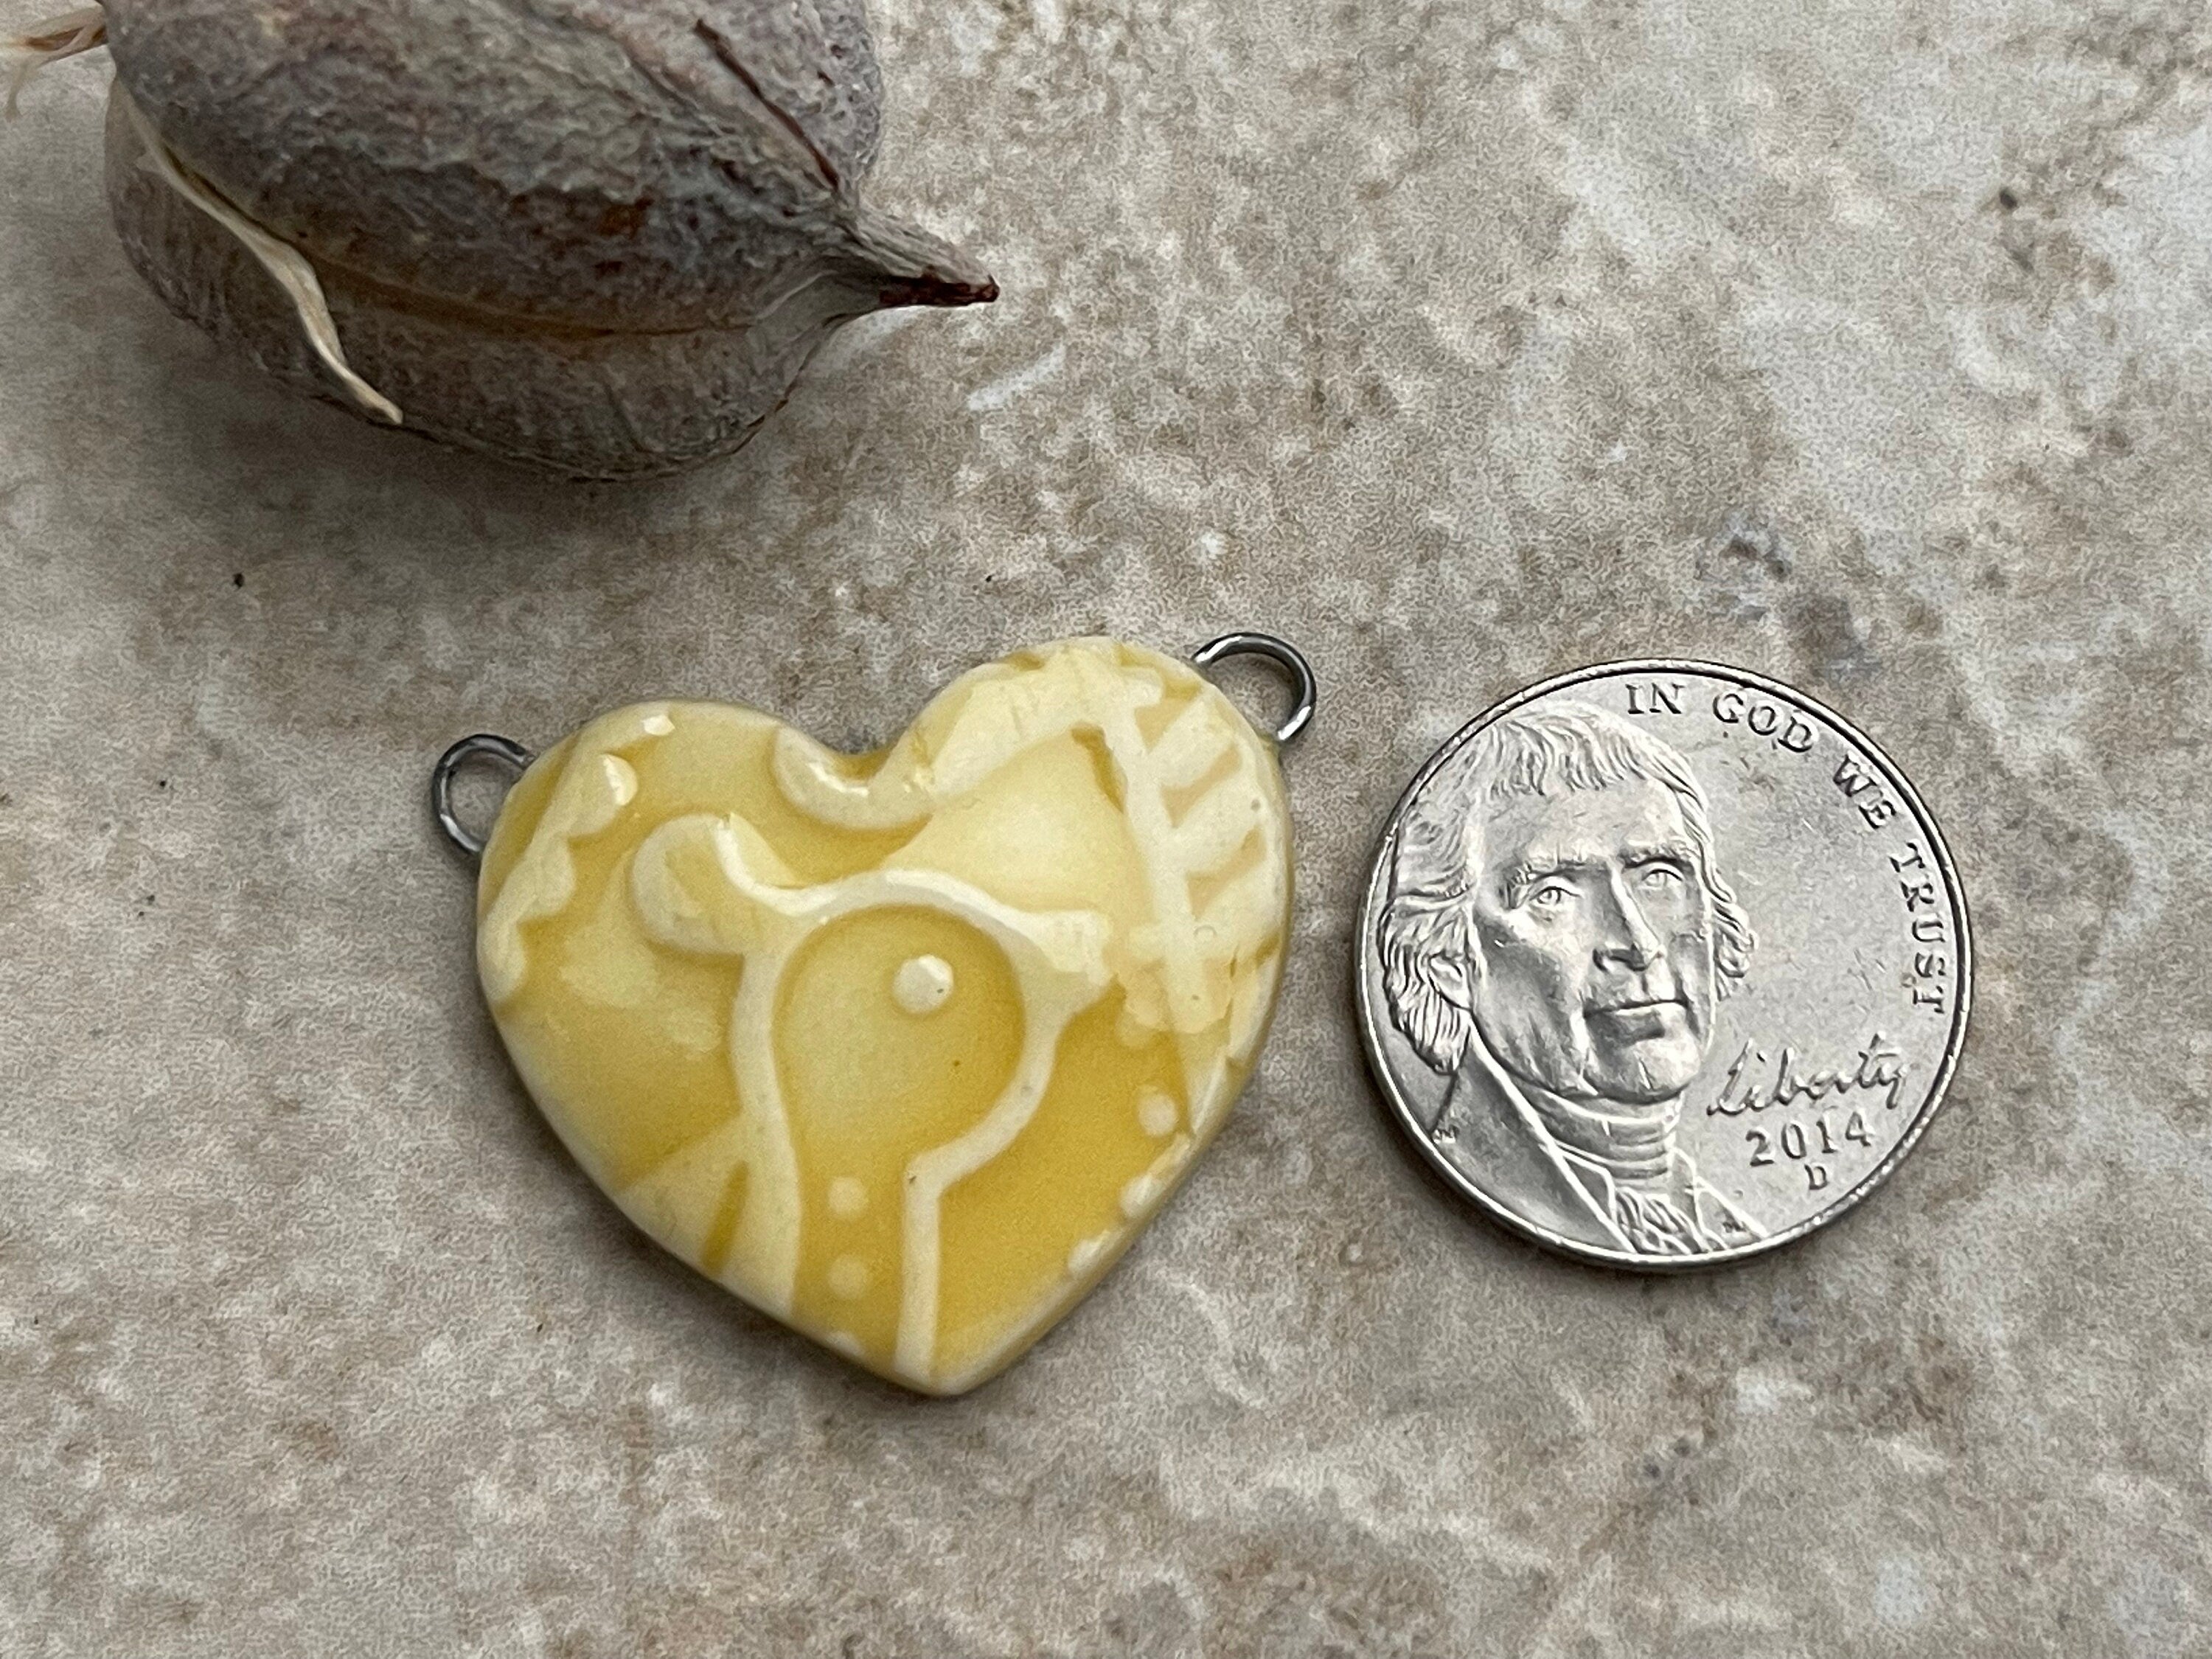 Yellow Bird Heart, Bird Pendant, Gift for Her, Porcelain Ceramic Pendant, Jewelry Making Components